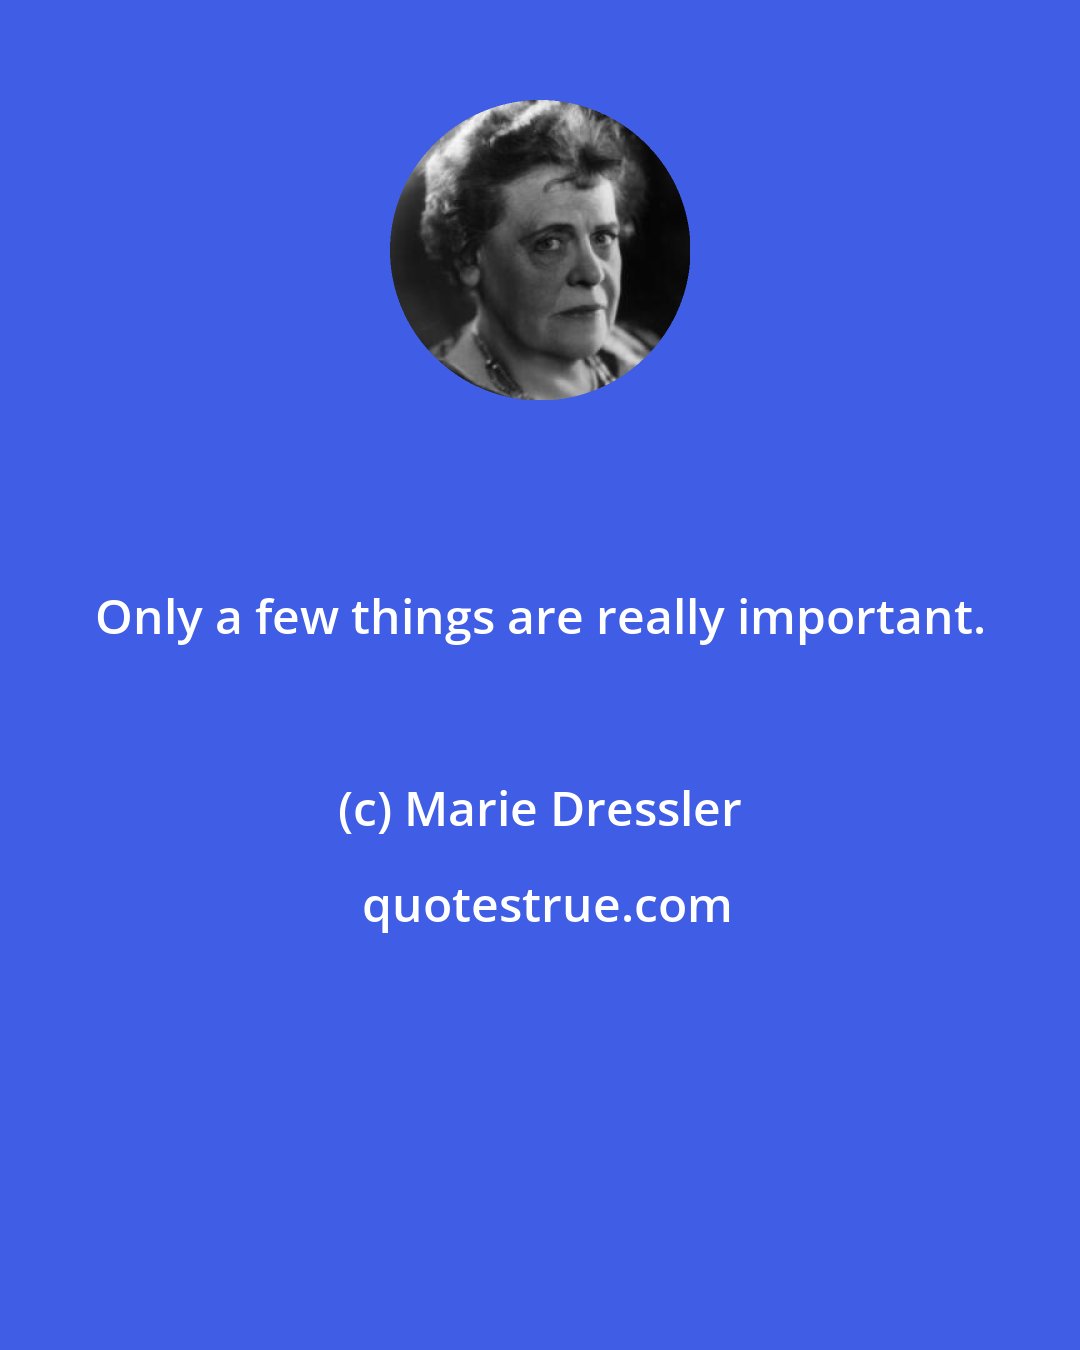 Marie Dressler: Only a few things are really important.